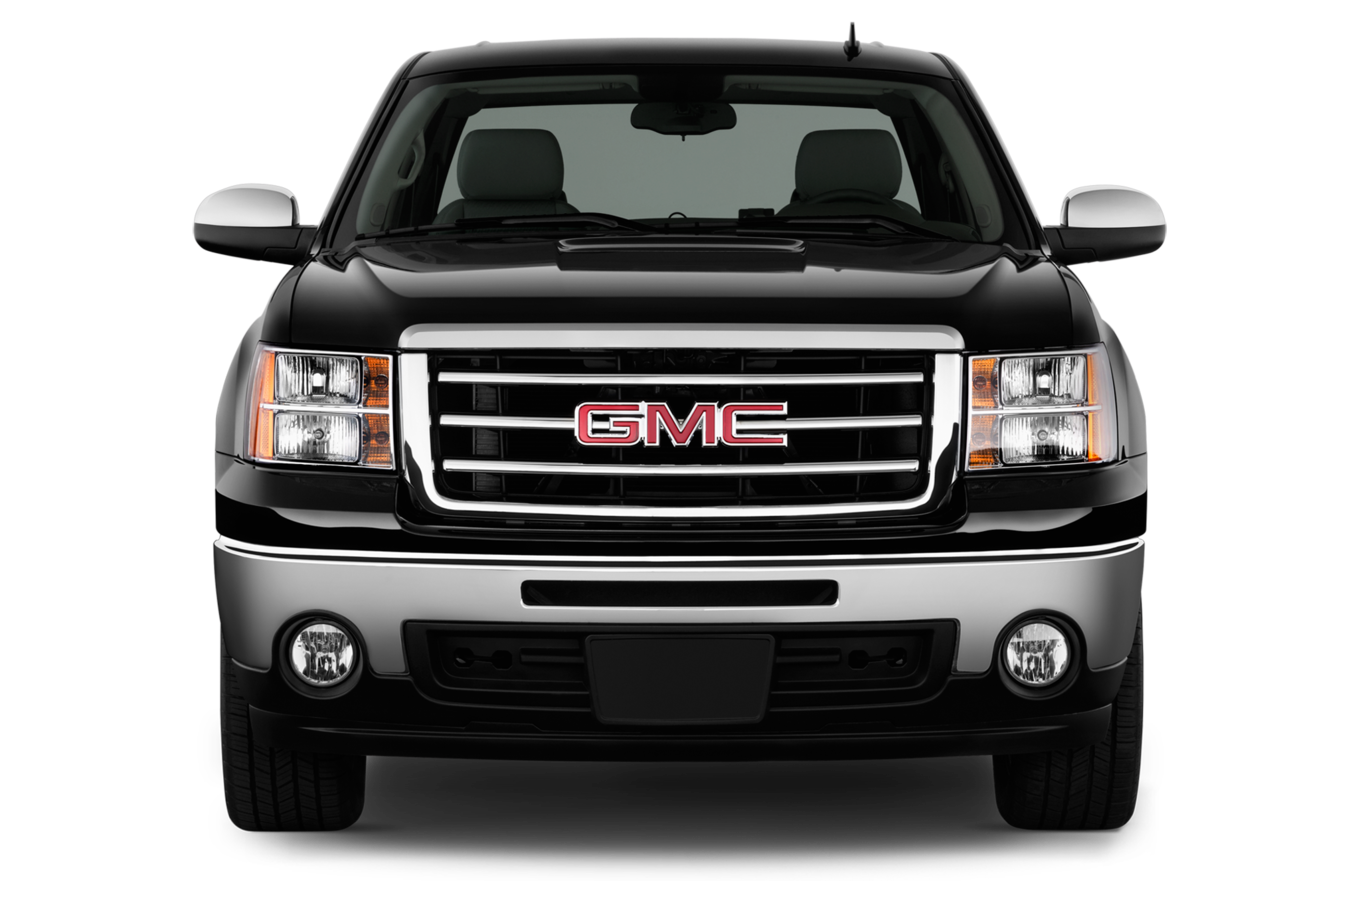 Ford Pickup Truck PNG Clipart